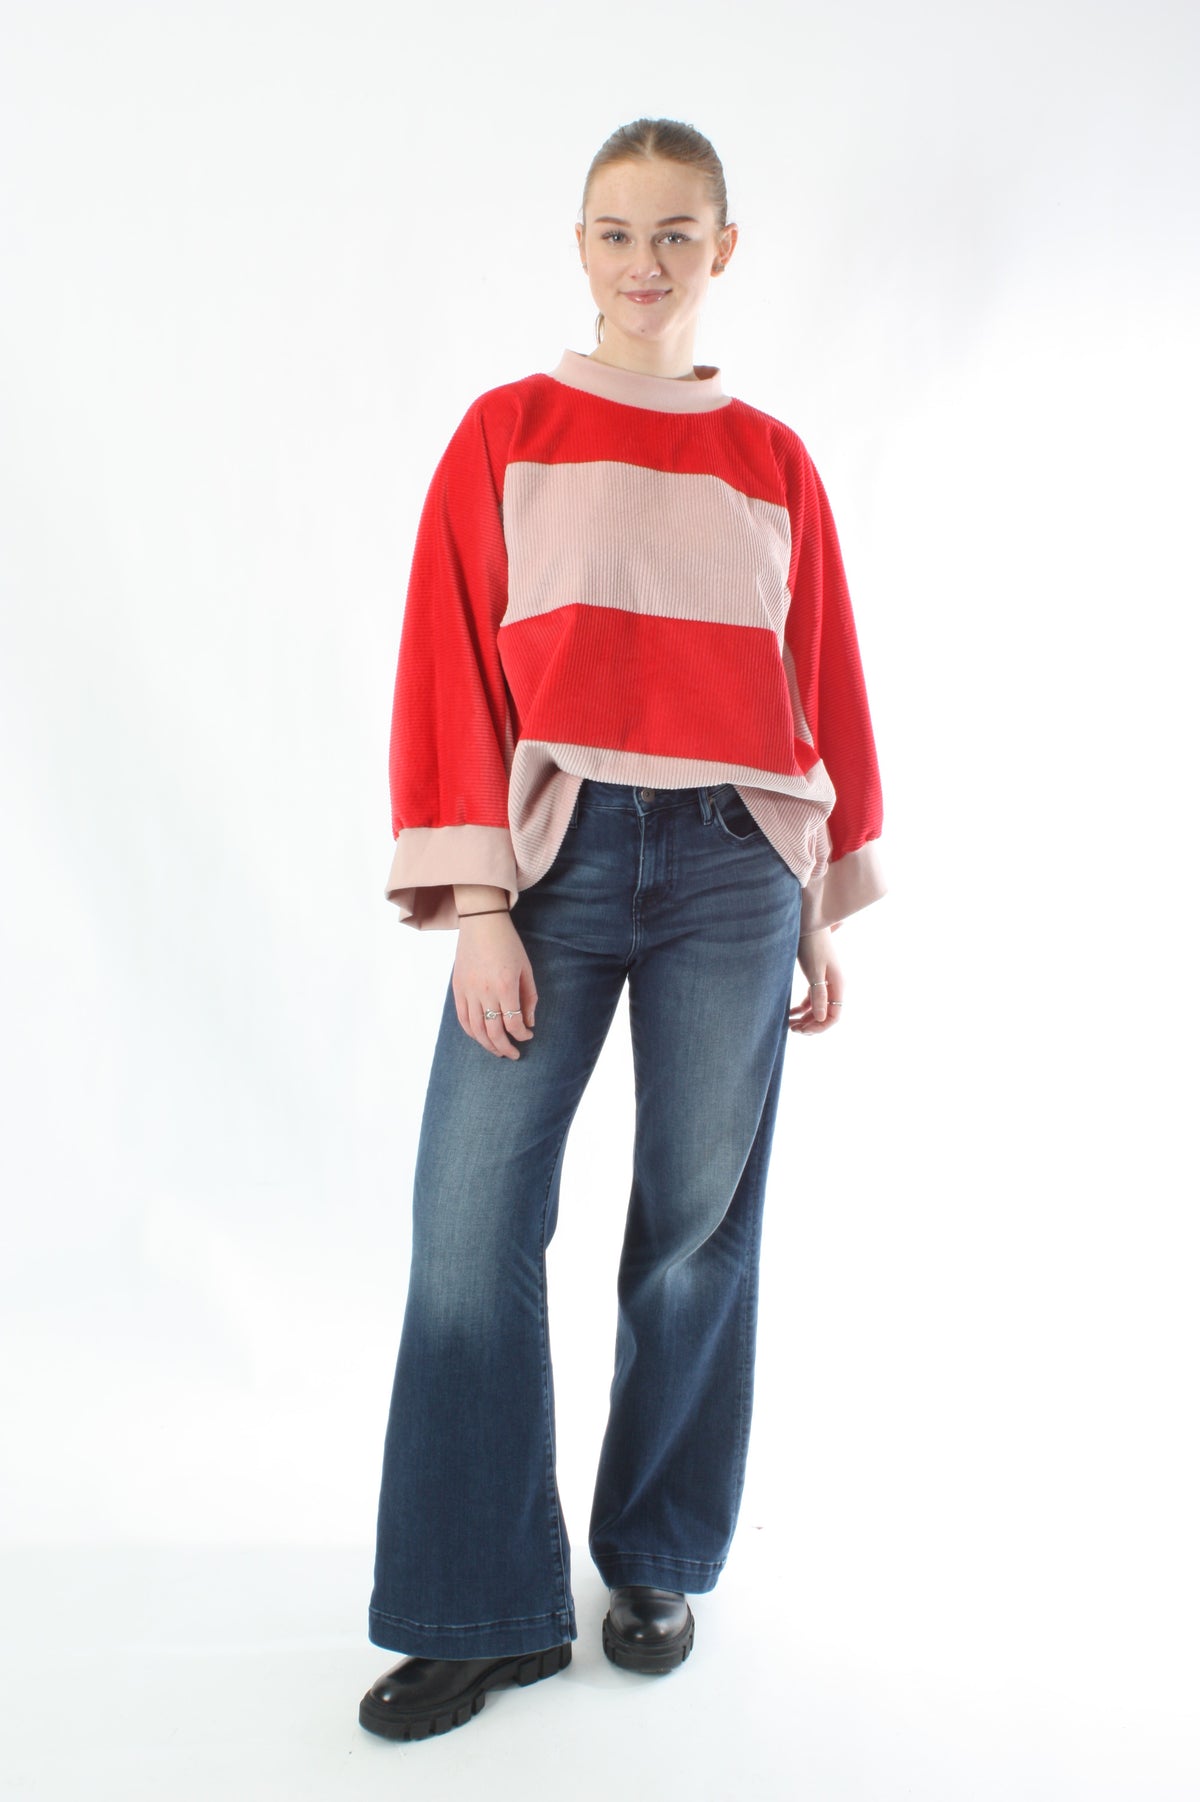 Corduroy Top - Pink and Red - Pre Order